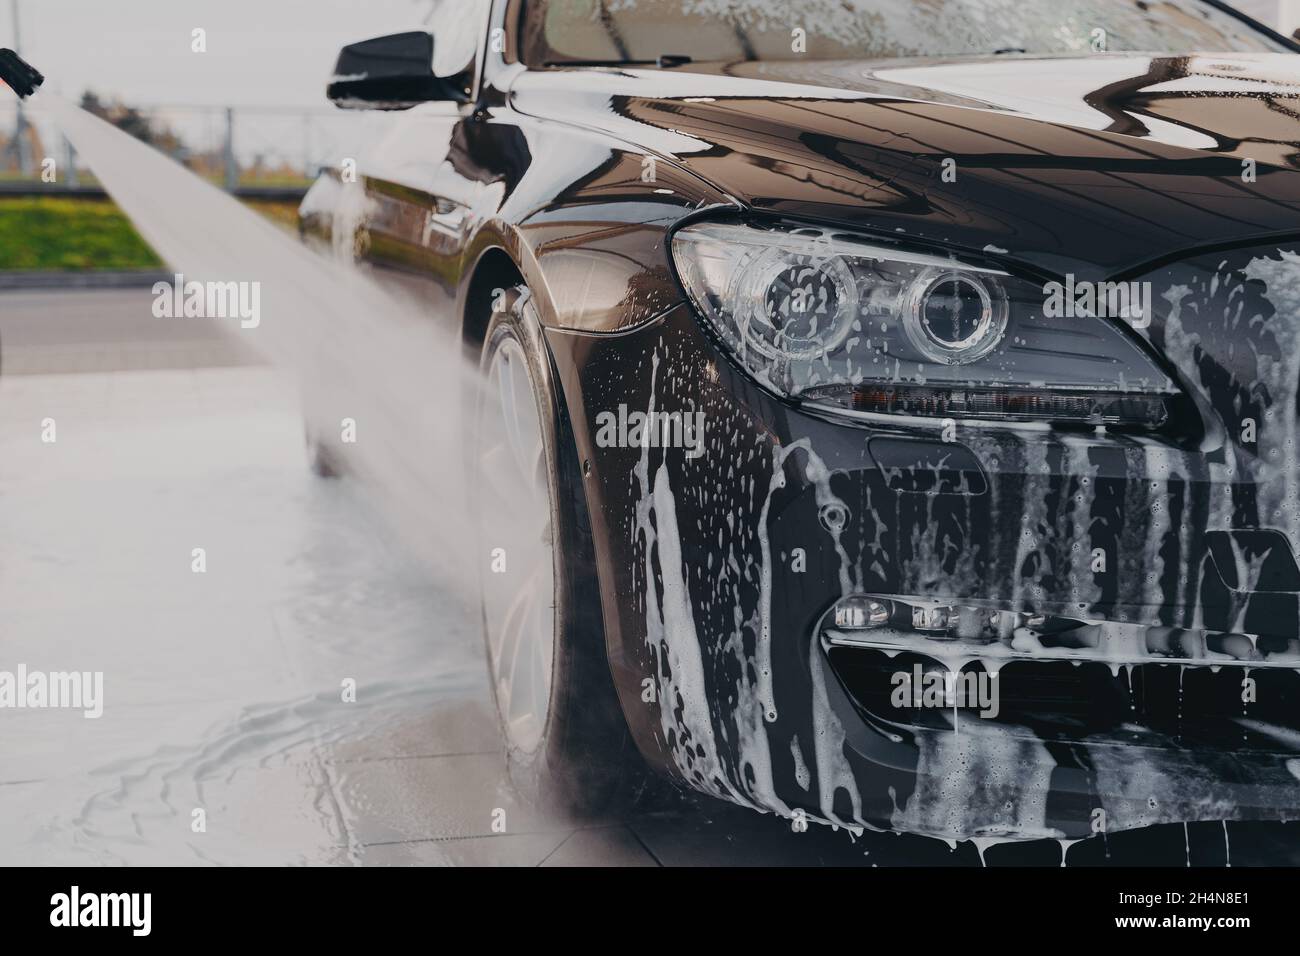 Professional car wash, spraying water from high pressure washer to rinse off suds Stock Photo